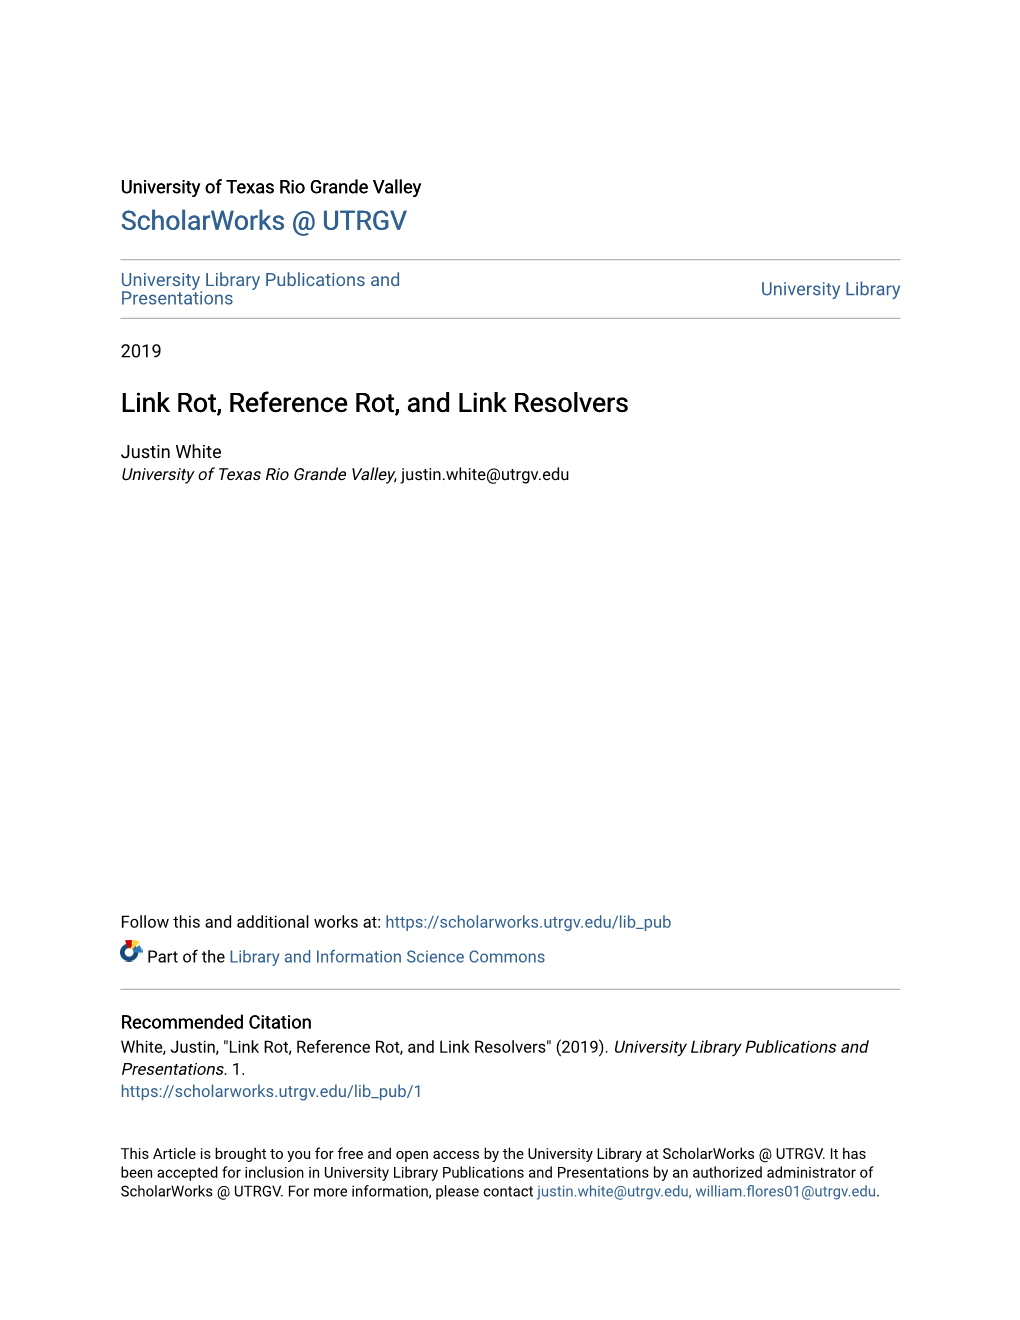 Link Rot, Reference Rot, and Link Resolvers